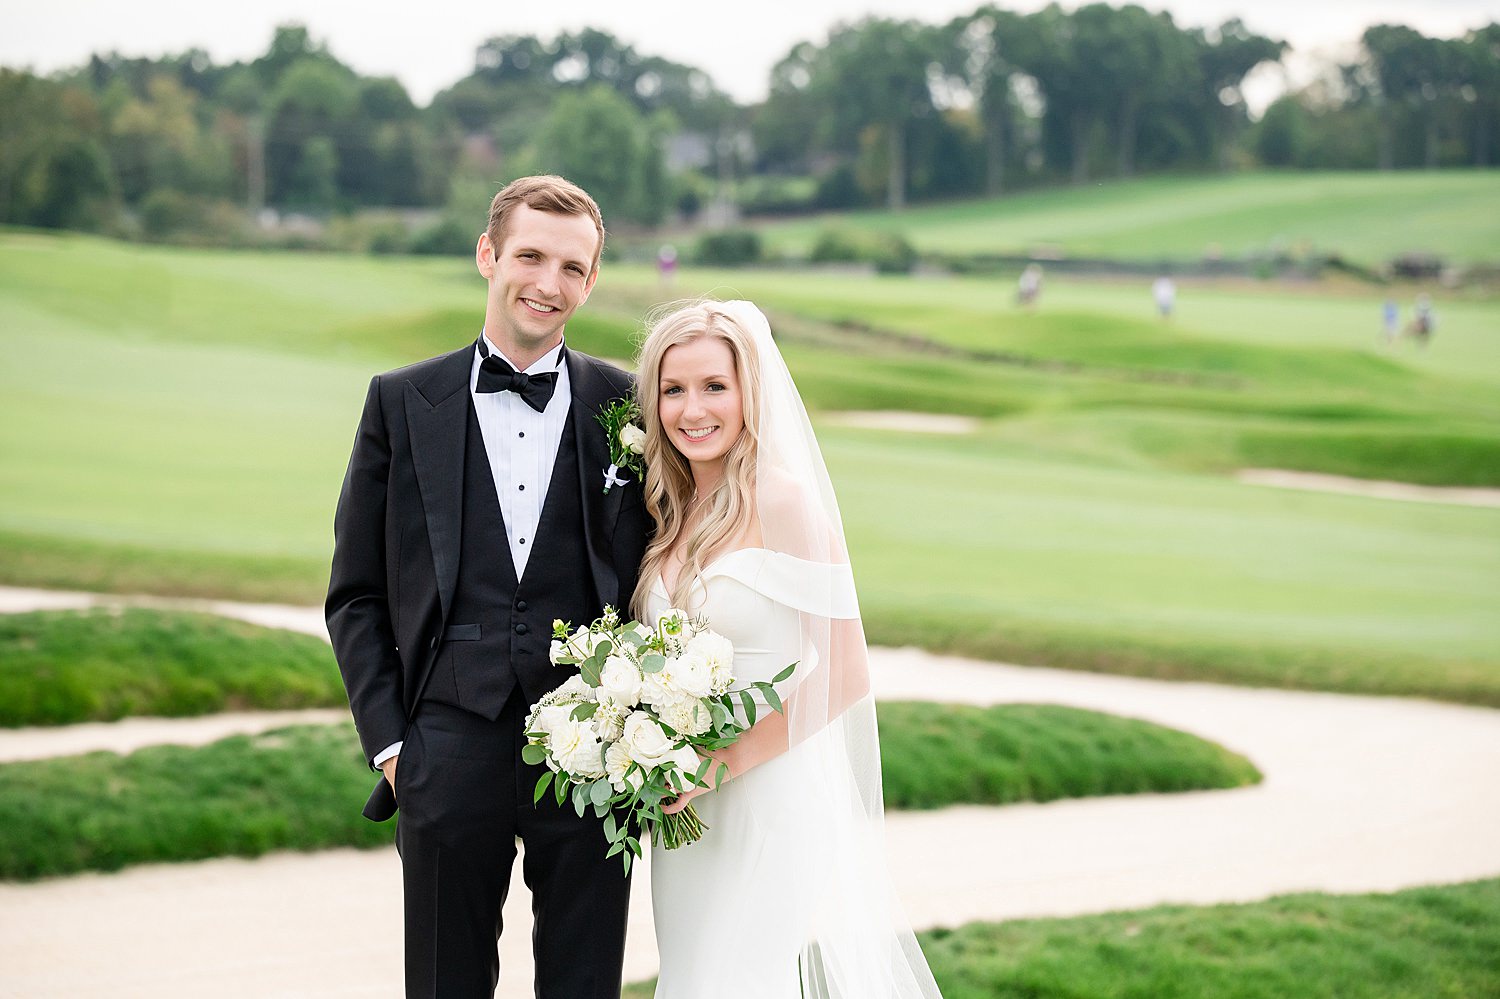 oakmont country club wedding photo at church pews • Wedding at St Paul Cathedral and Oakmont Country Club - Lauren + Cole